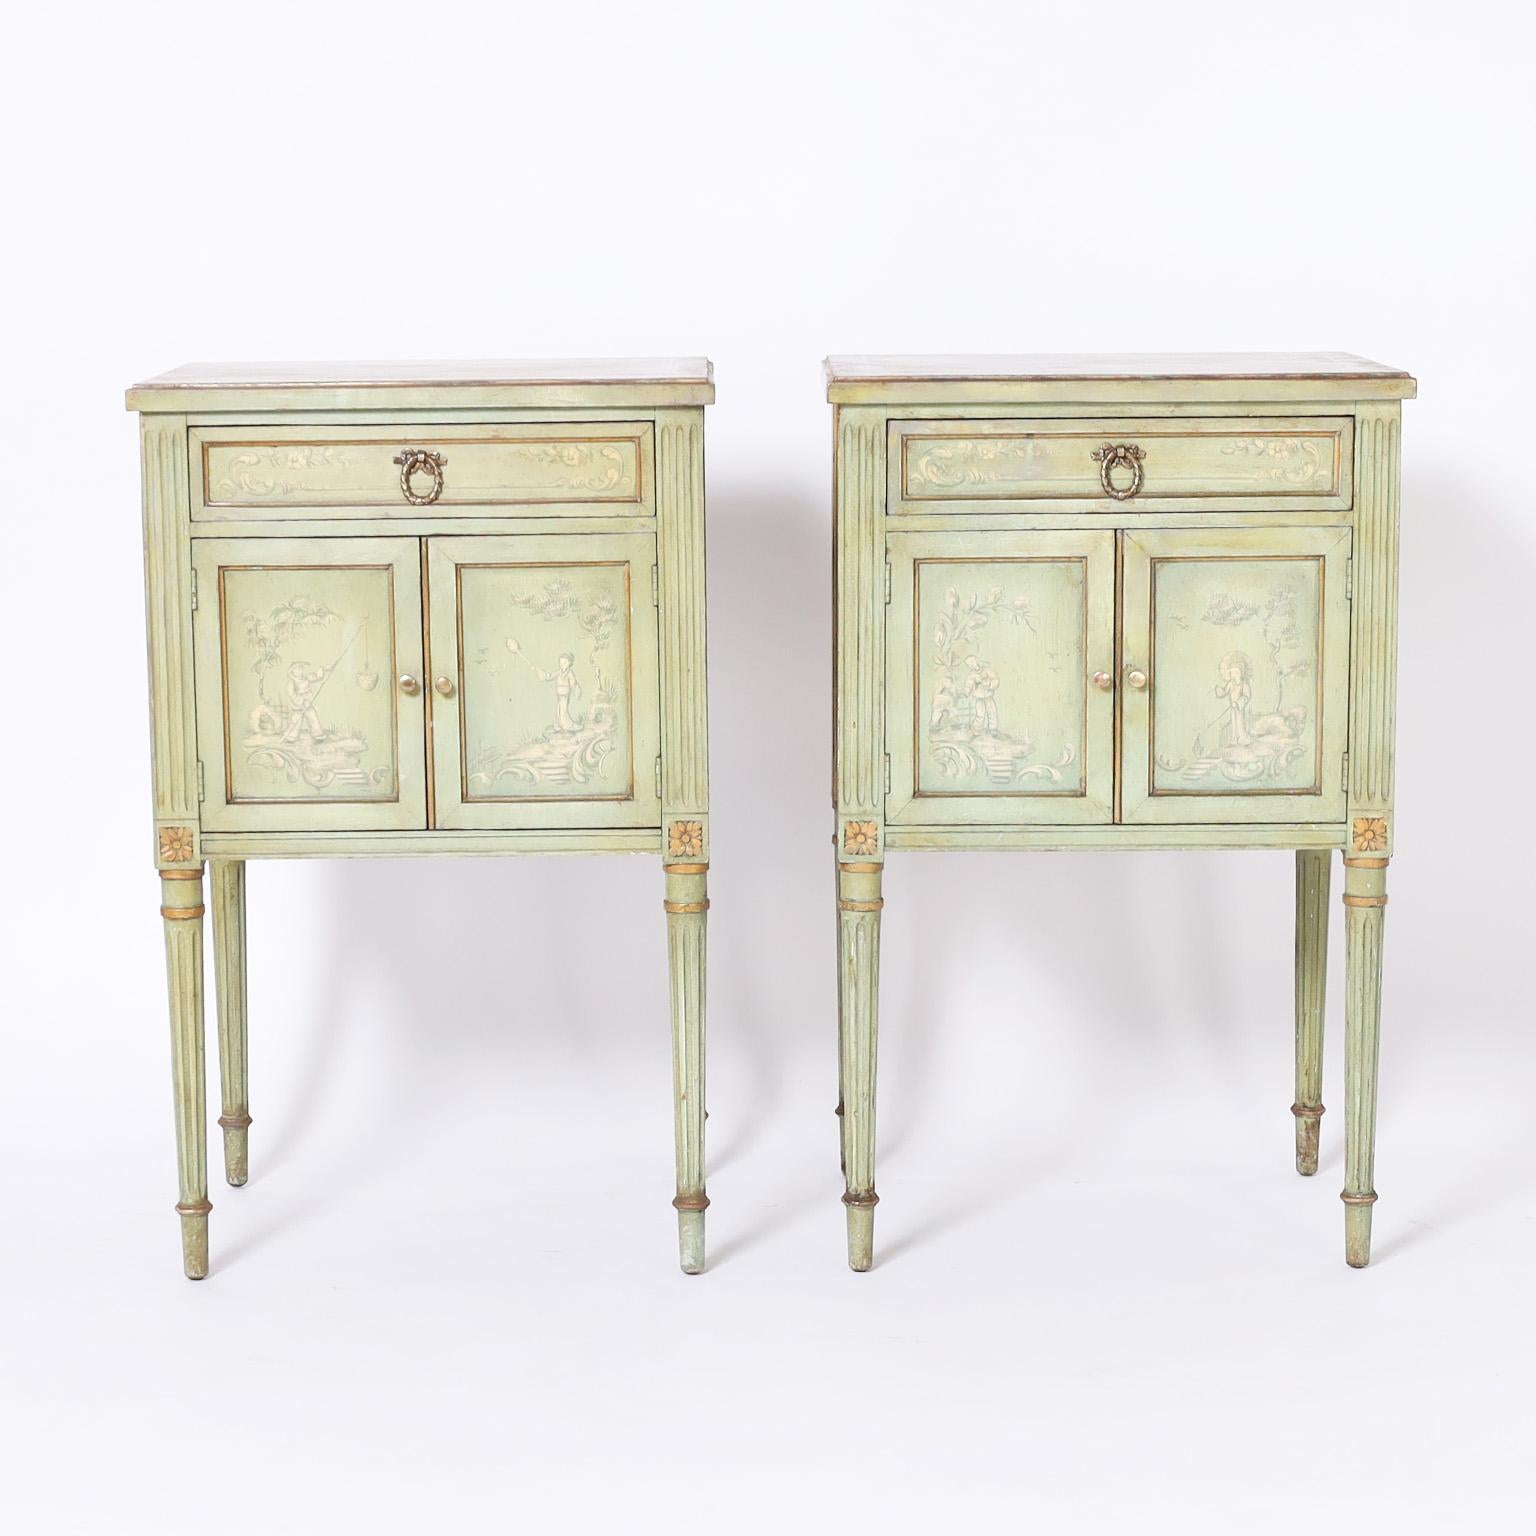 Charming pair of Italian stands crafted in hardwood with classic form, painted continental green and decorated in soft and subtle chinoiserie on the top sides and front over elegant fluted legs.